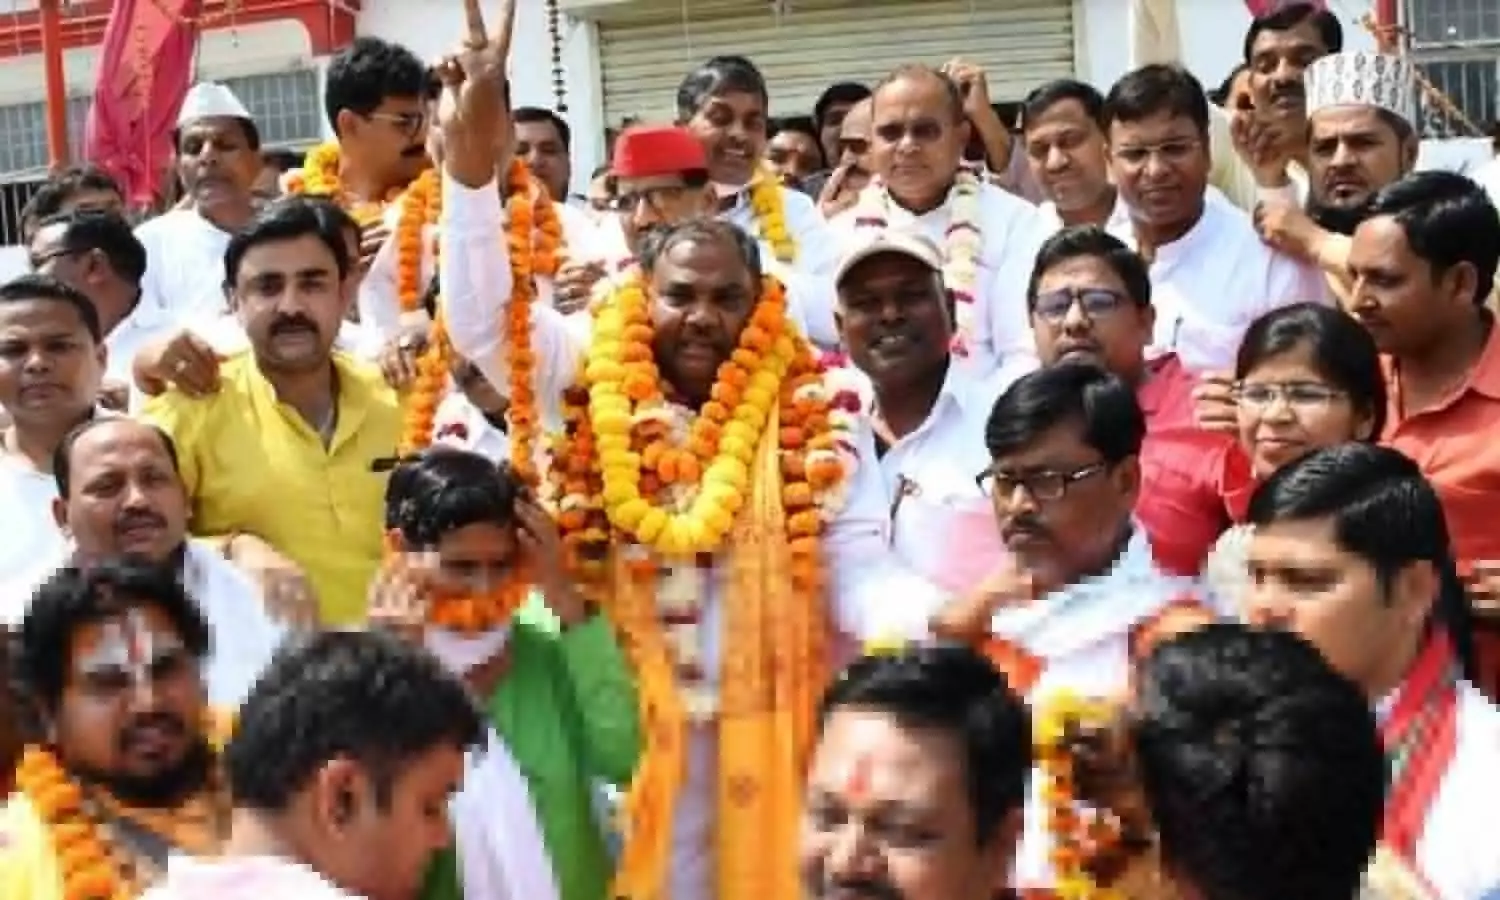 UP MLC Election 2022: SP caUP MLC Election 2022: SP candidate Hiralal Yadav filed nomination, said- numbers are with Samajwadi Partyndidate Hiralal Yadav filed nomination, said- numbers are with Samajwadi Party